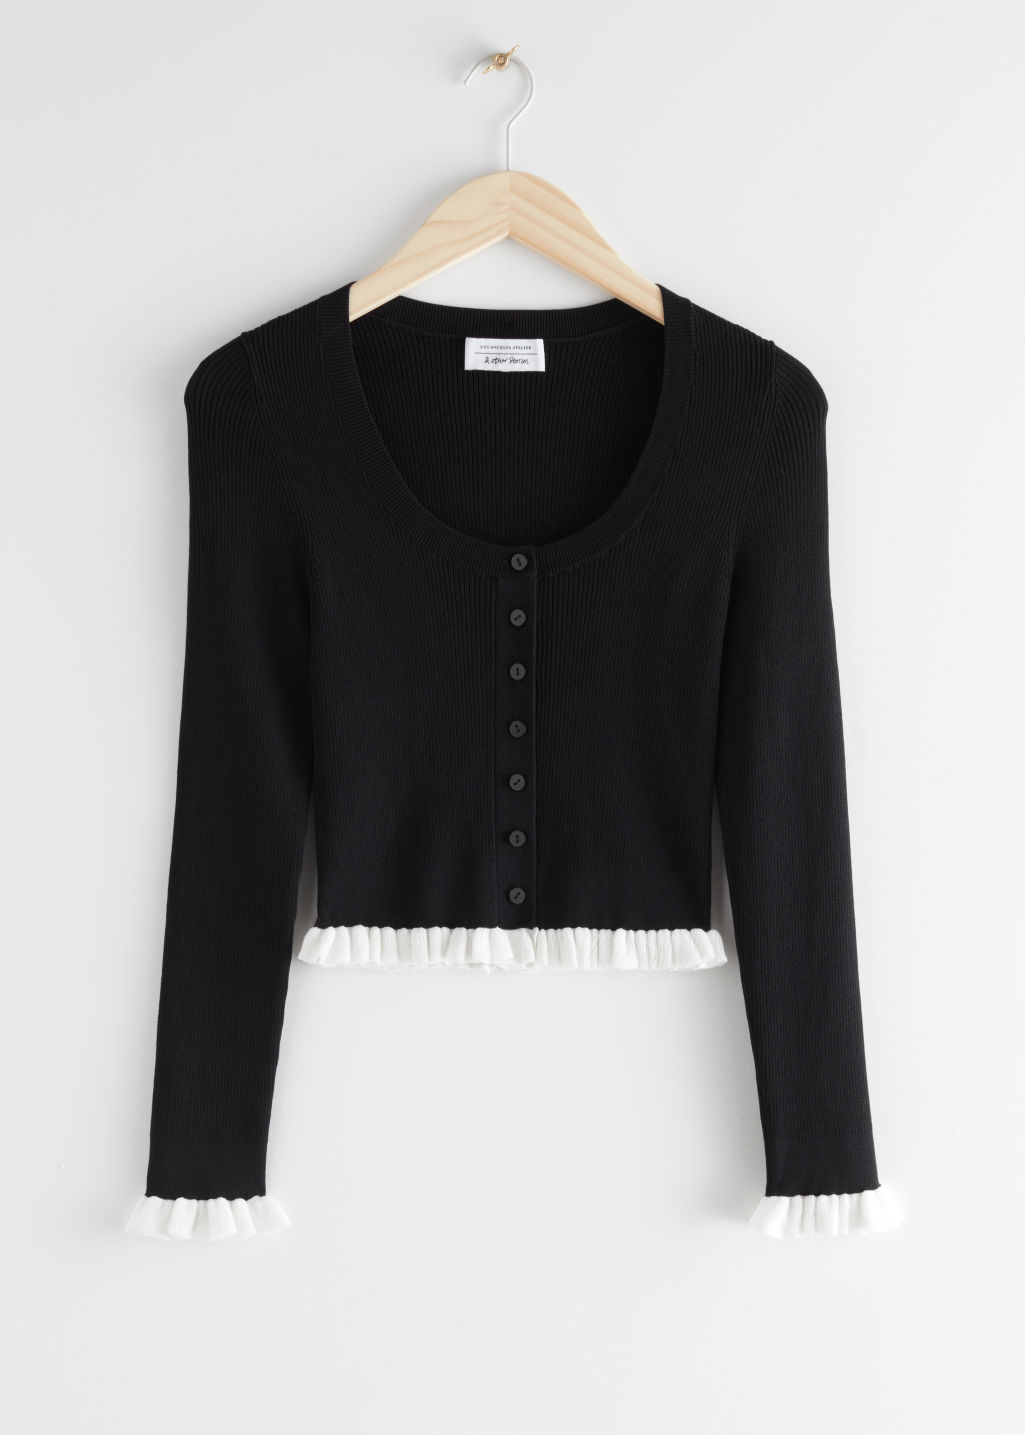 Fitted Button Up Ruffle Top - Black - Tops & T-shirts - & Other Stories